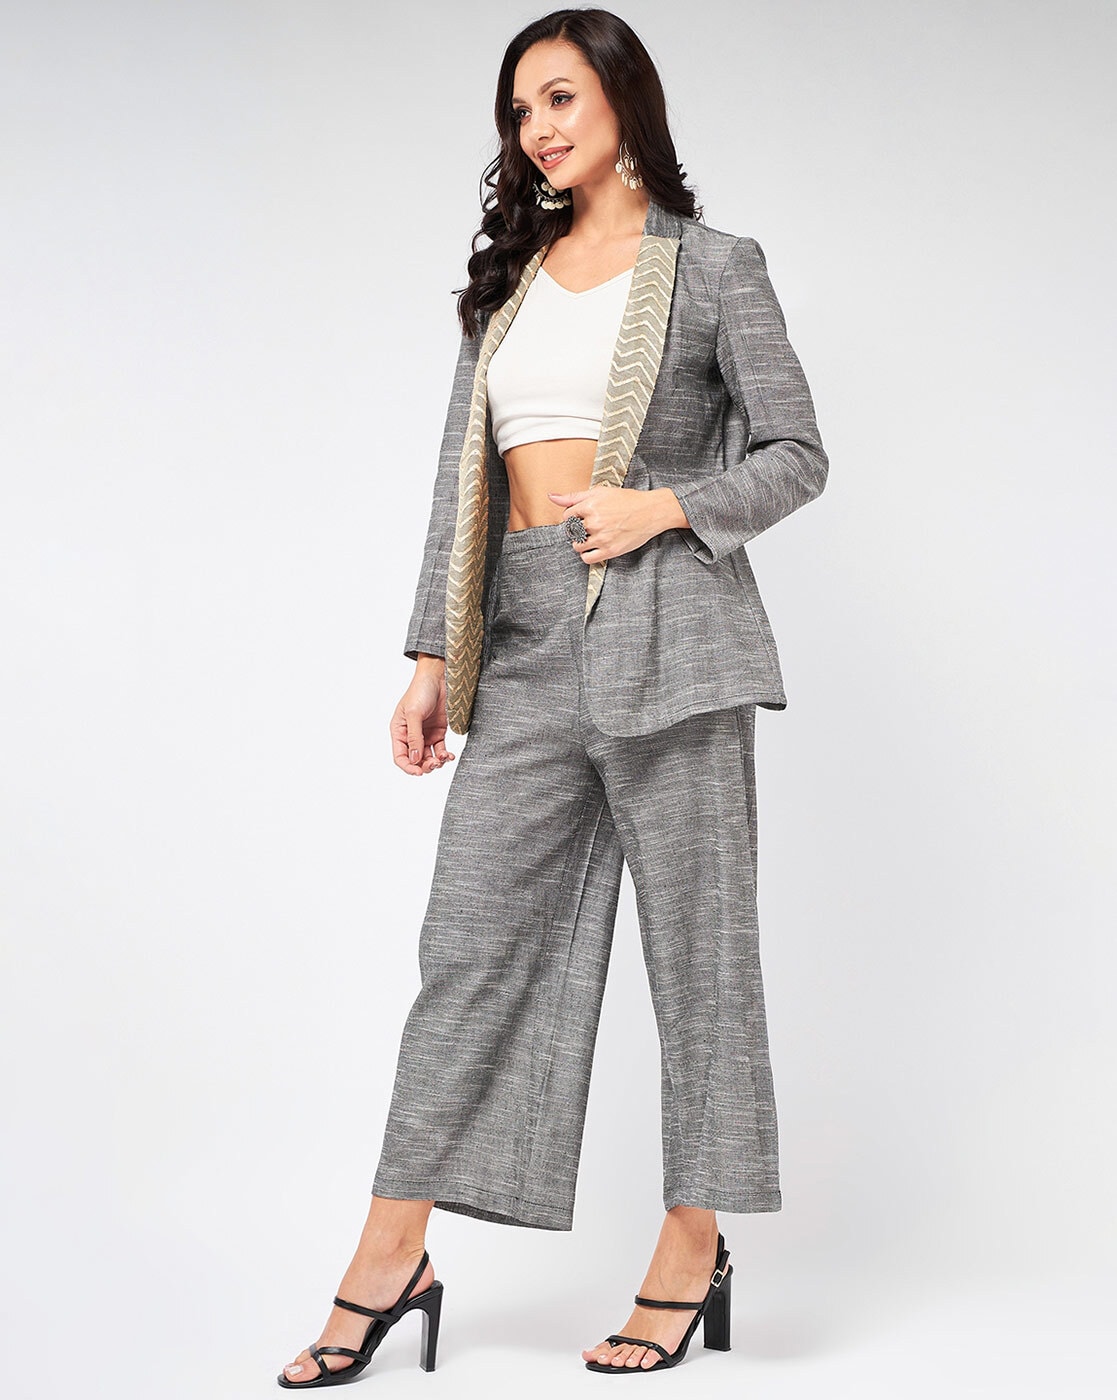 A Classic with a Feminine Twist | Blazer outfits for women, Grey dress pants  outfit, Slacks for women